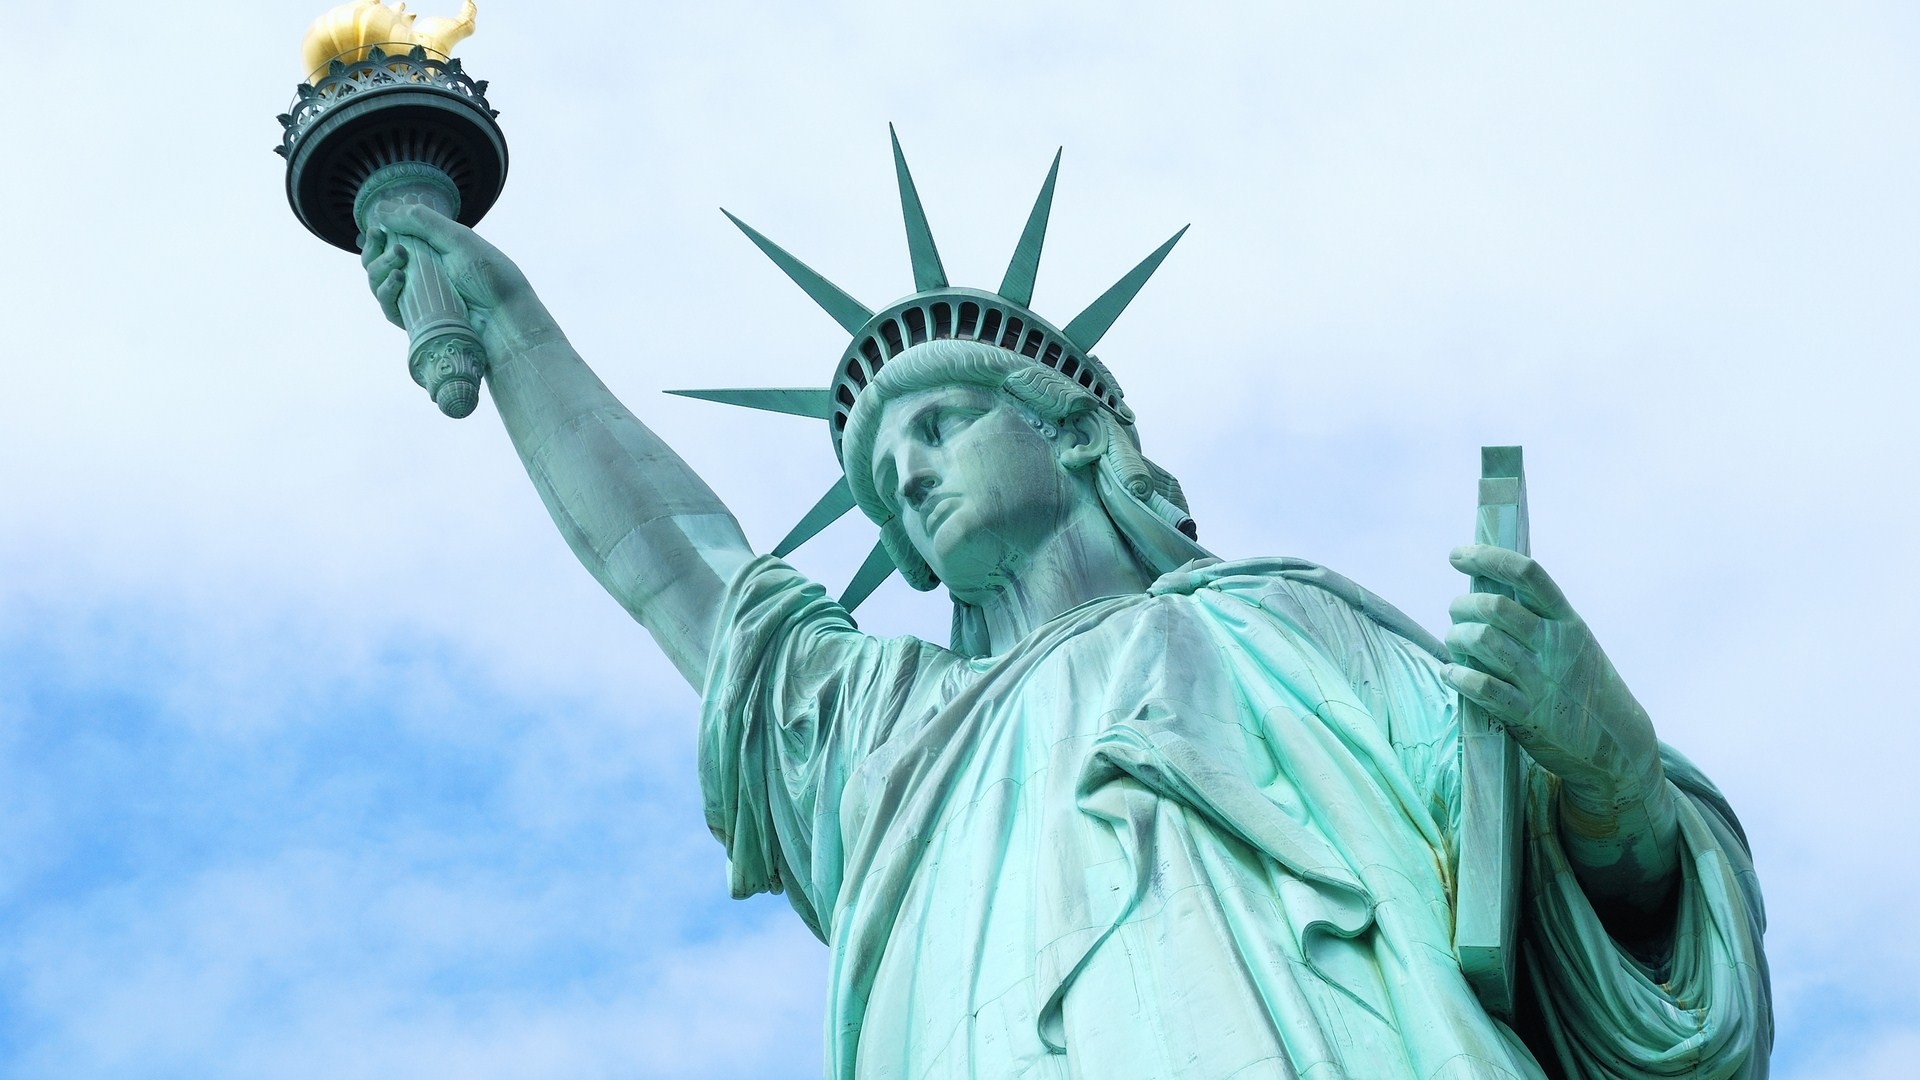 1920x1080 10 2015 By Stephen Comments Off on Statue of Liberty Wallpapers 